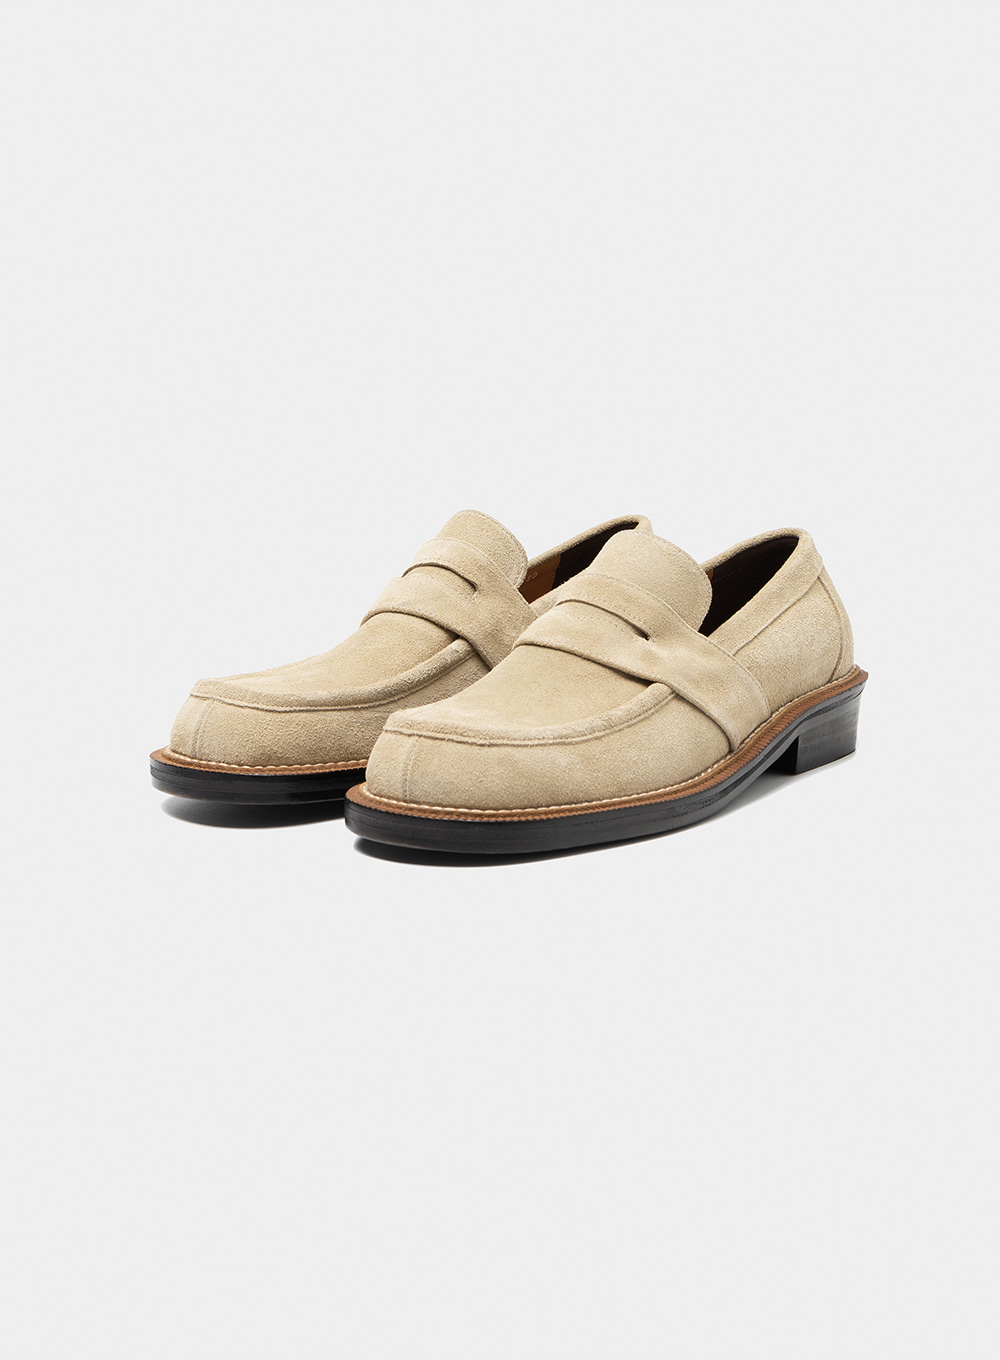 Elgin Classic Suede Loafer